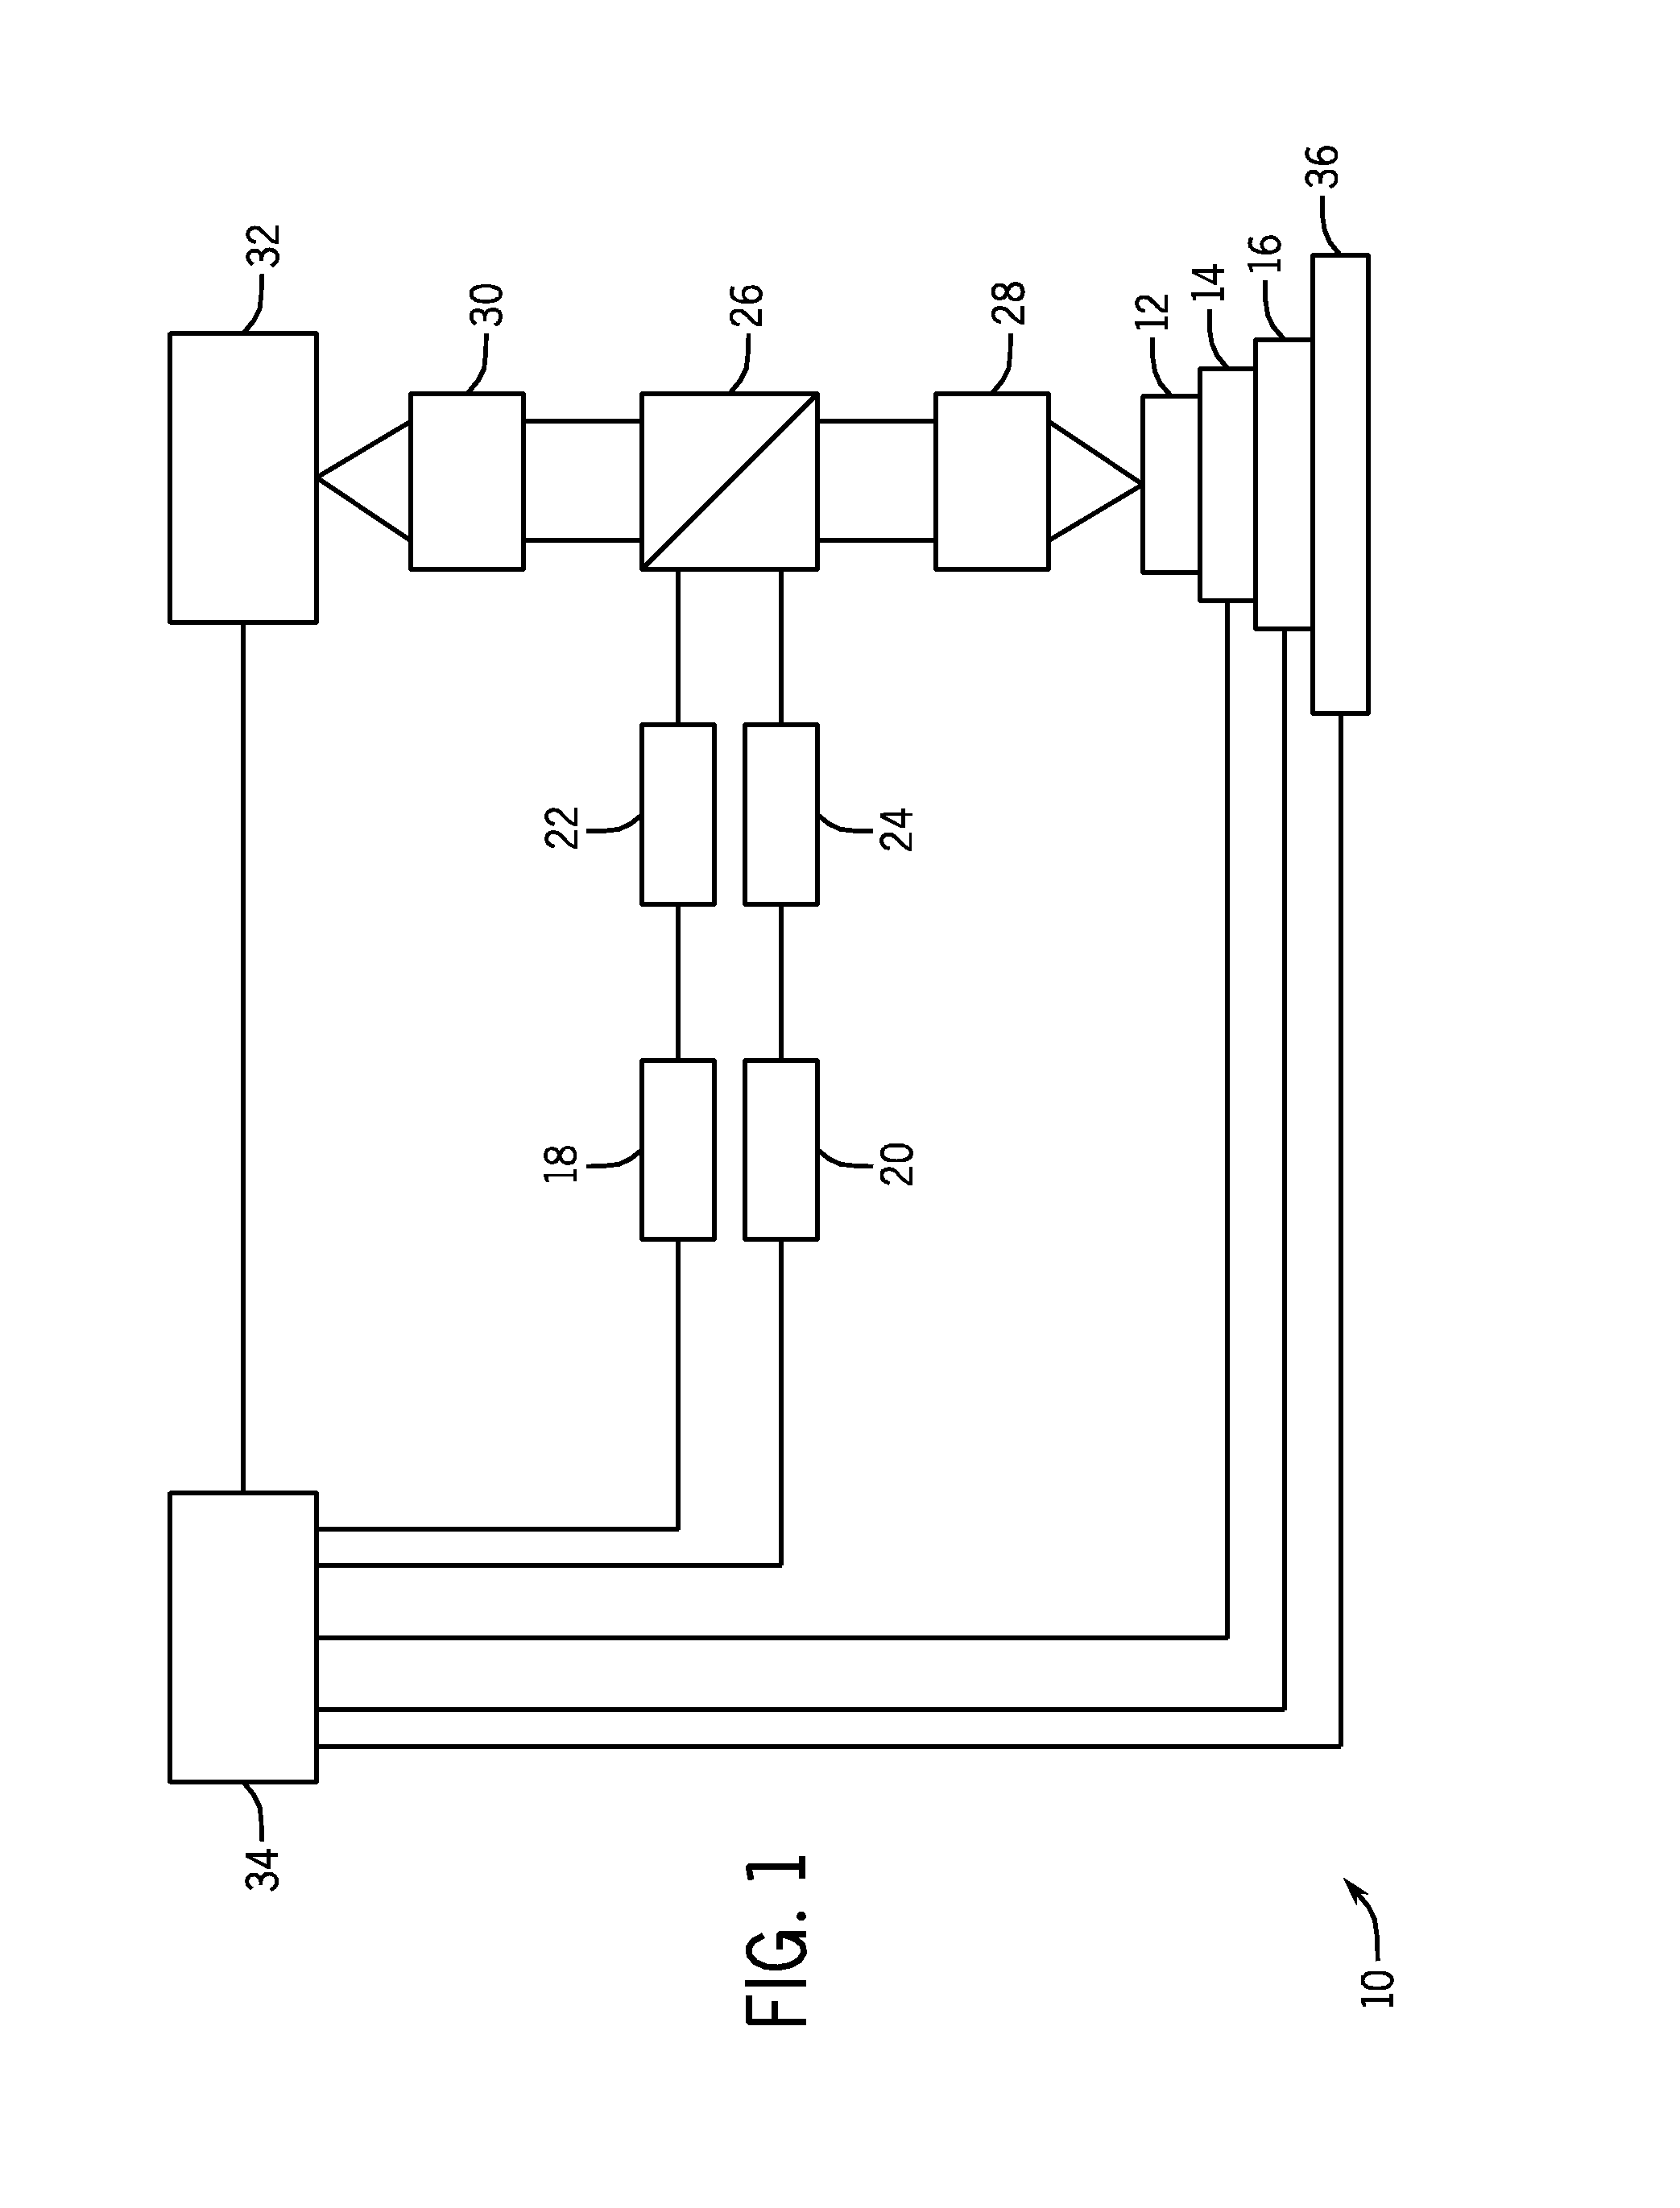 Biological sample temperature control system and method